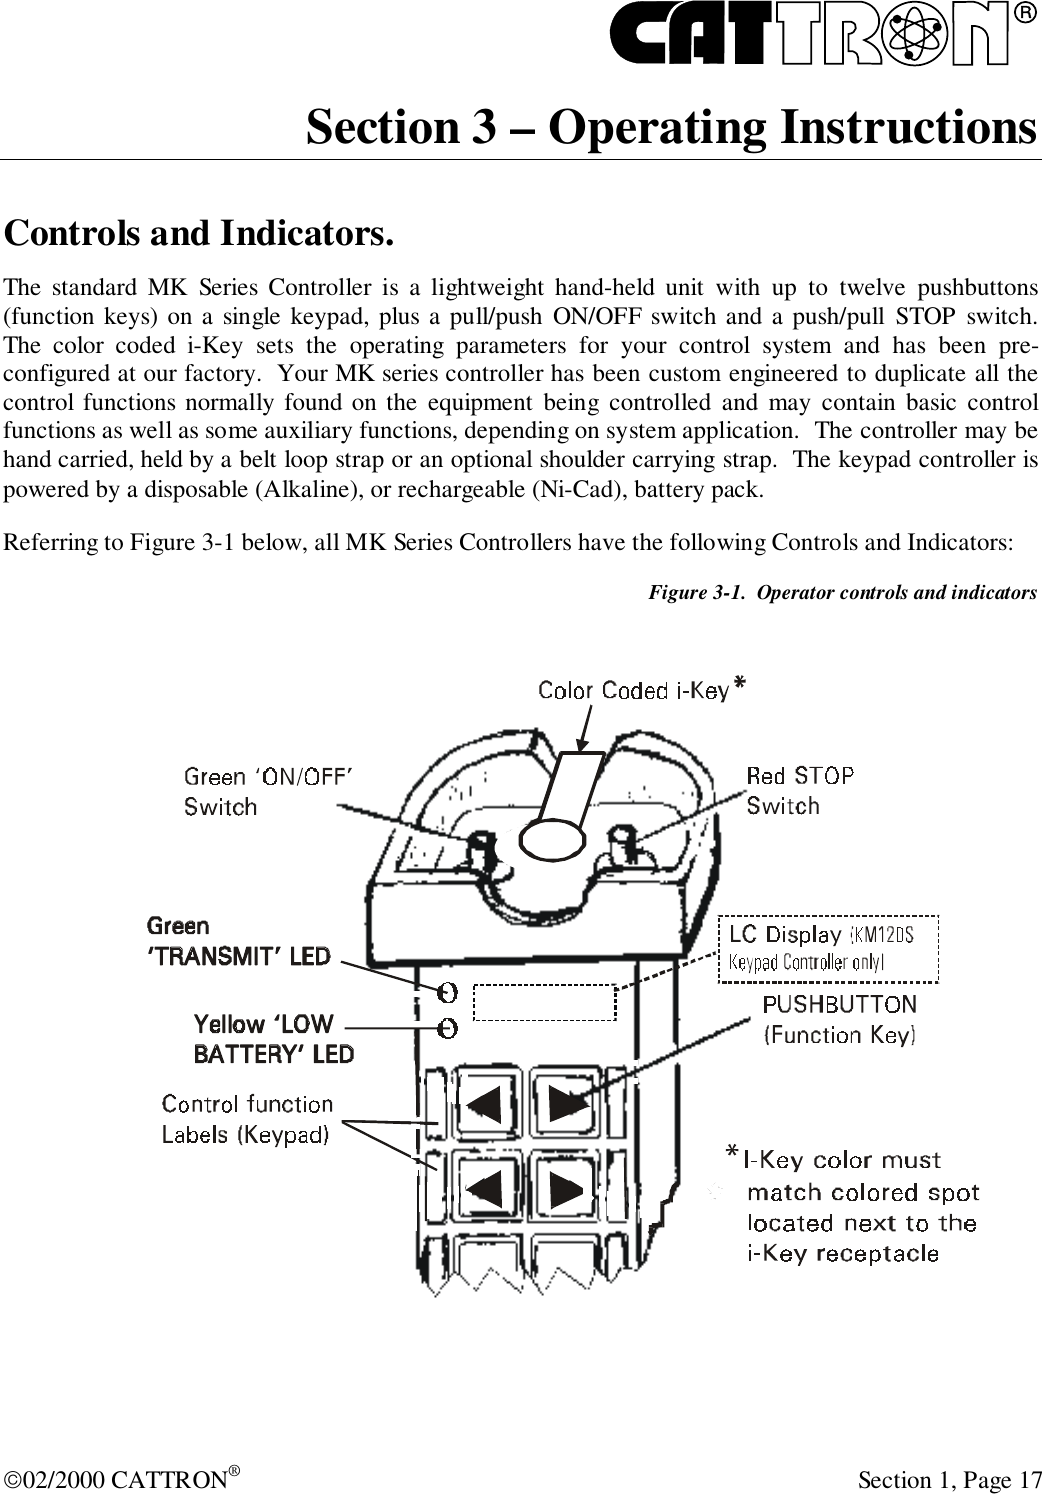 R02/2000 CATTRON® Section 1, Page 17Section 3 – Operating InstructionsControls and Indicators.The standard MK Series Controller is a lightweight hand-held unit with up to twelve pushbuttons(function keys) on a single keypad, plus a pull/push ON/OFF switch and a push/pull STOP switch.The color coded i-Key sets the operating parameters for your control system and has been pre-configured at our factory.  Your MK series controller has been custom engineered to duplicate all thecontrol functions normally found on the equipment being controlled and may contain basic controlfunctions as well as some auxiliary functions, depending on system application.  The controller may behand carried, held by a belt loop strap or an optional shoulder carrying strap.  The keypad controller ispowered by a disposable (Alkaline), or rechargeable (Ni-Cad), battery pack.Referring to Figure 3-1 below, all MK Series Controllers have the following Controls and Indicators:Figure 3-1.  Operator controls and indicators